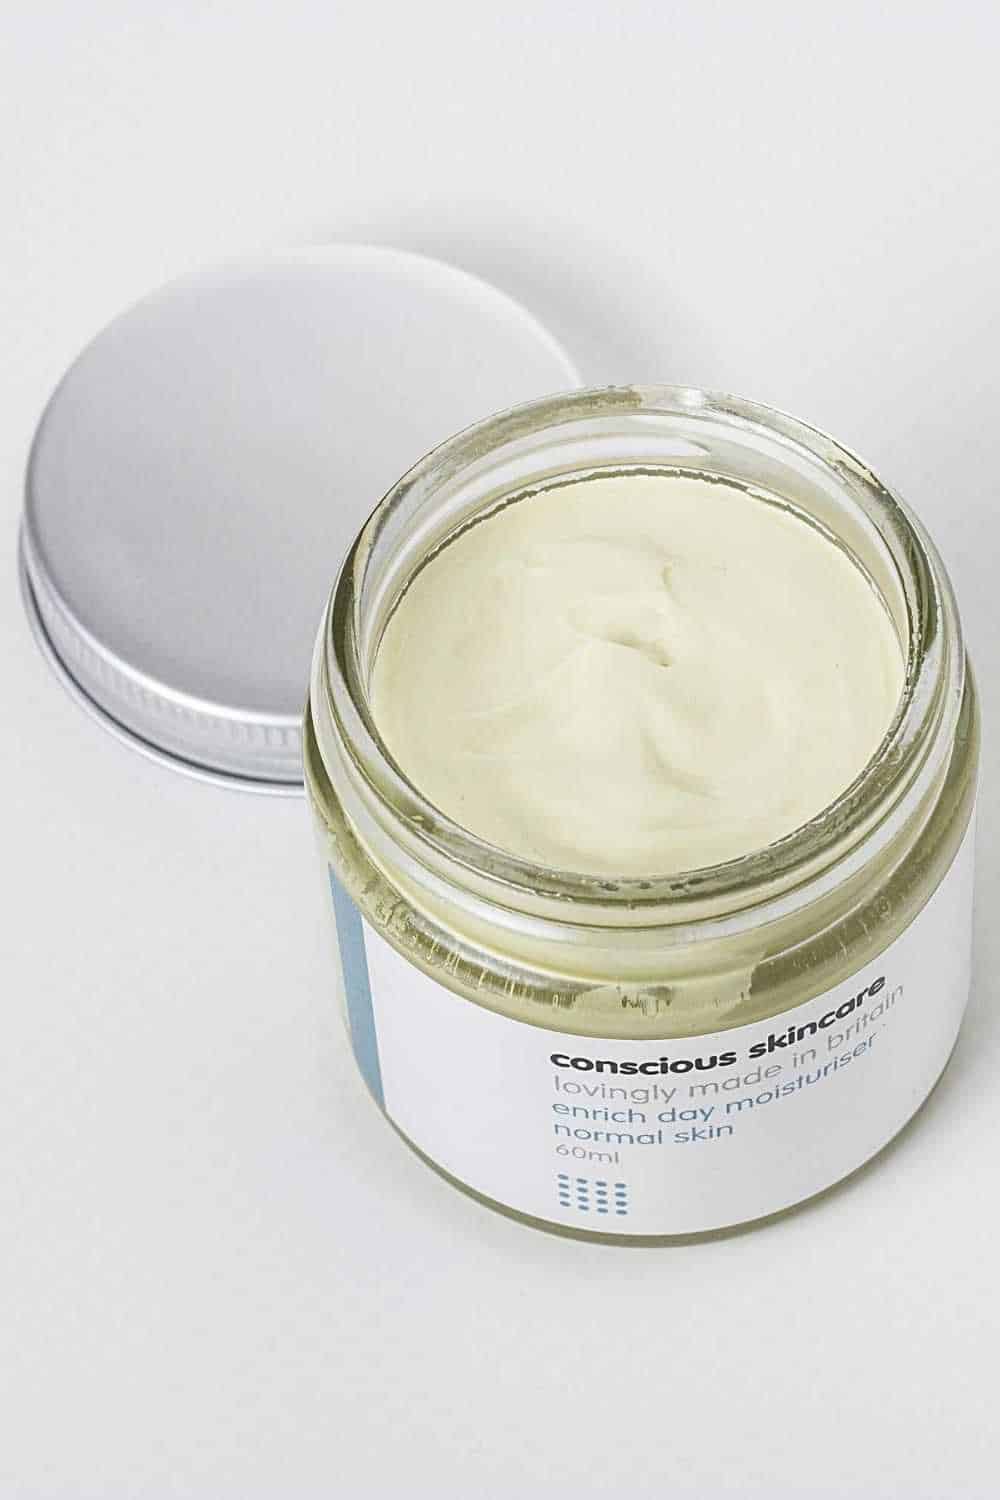 It’s pretty important then to to find a cruelty free moisturizer that works for both you and the environment. Which is why we’ve made a list of our favorites. All in support of positive, healthy and environmentally conscious choices when it comes to buying the best body care products. Image by Conscious Skincare #crueltyfreemoisturizer #sustainablejungle